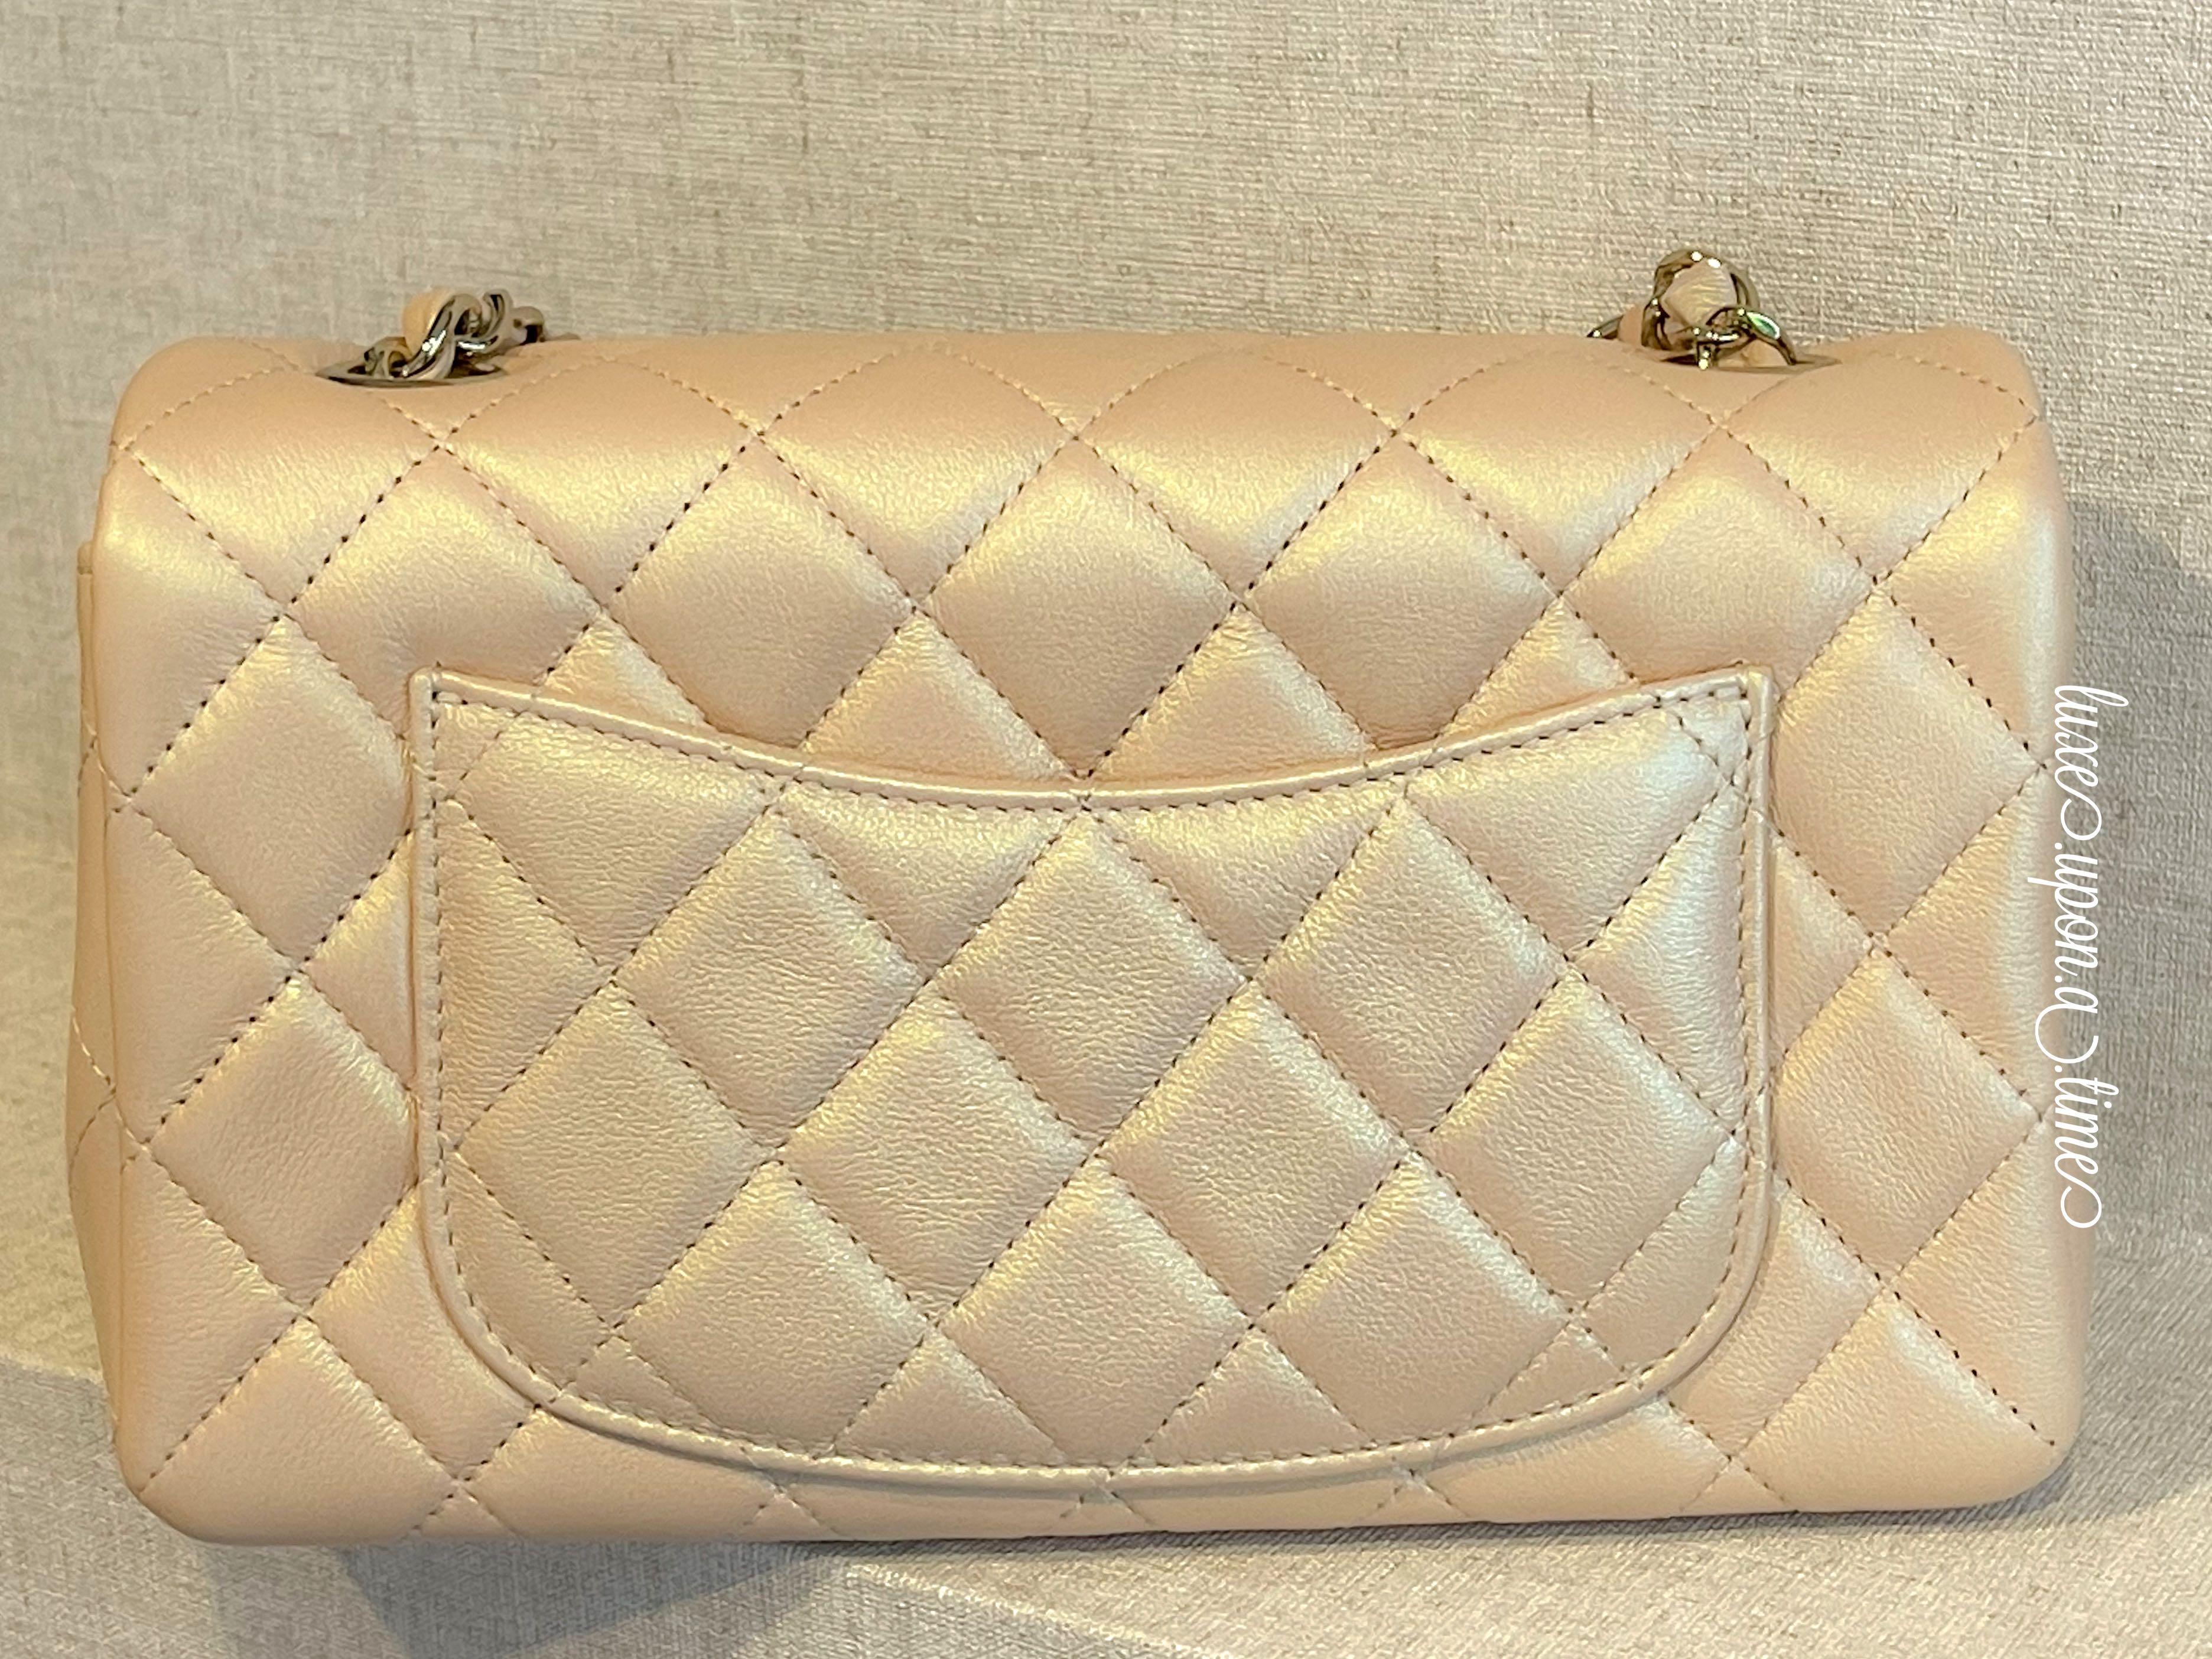 Chanel Camera Bag Small, Iridescent Yellow Caviar Leather with